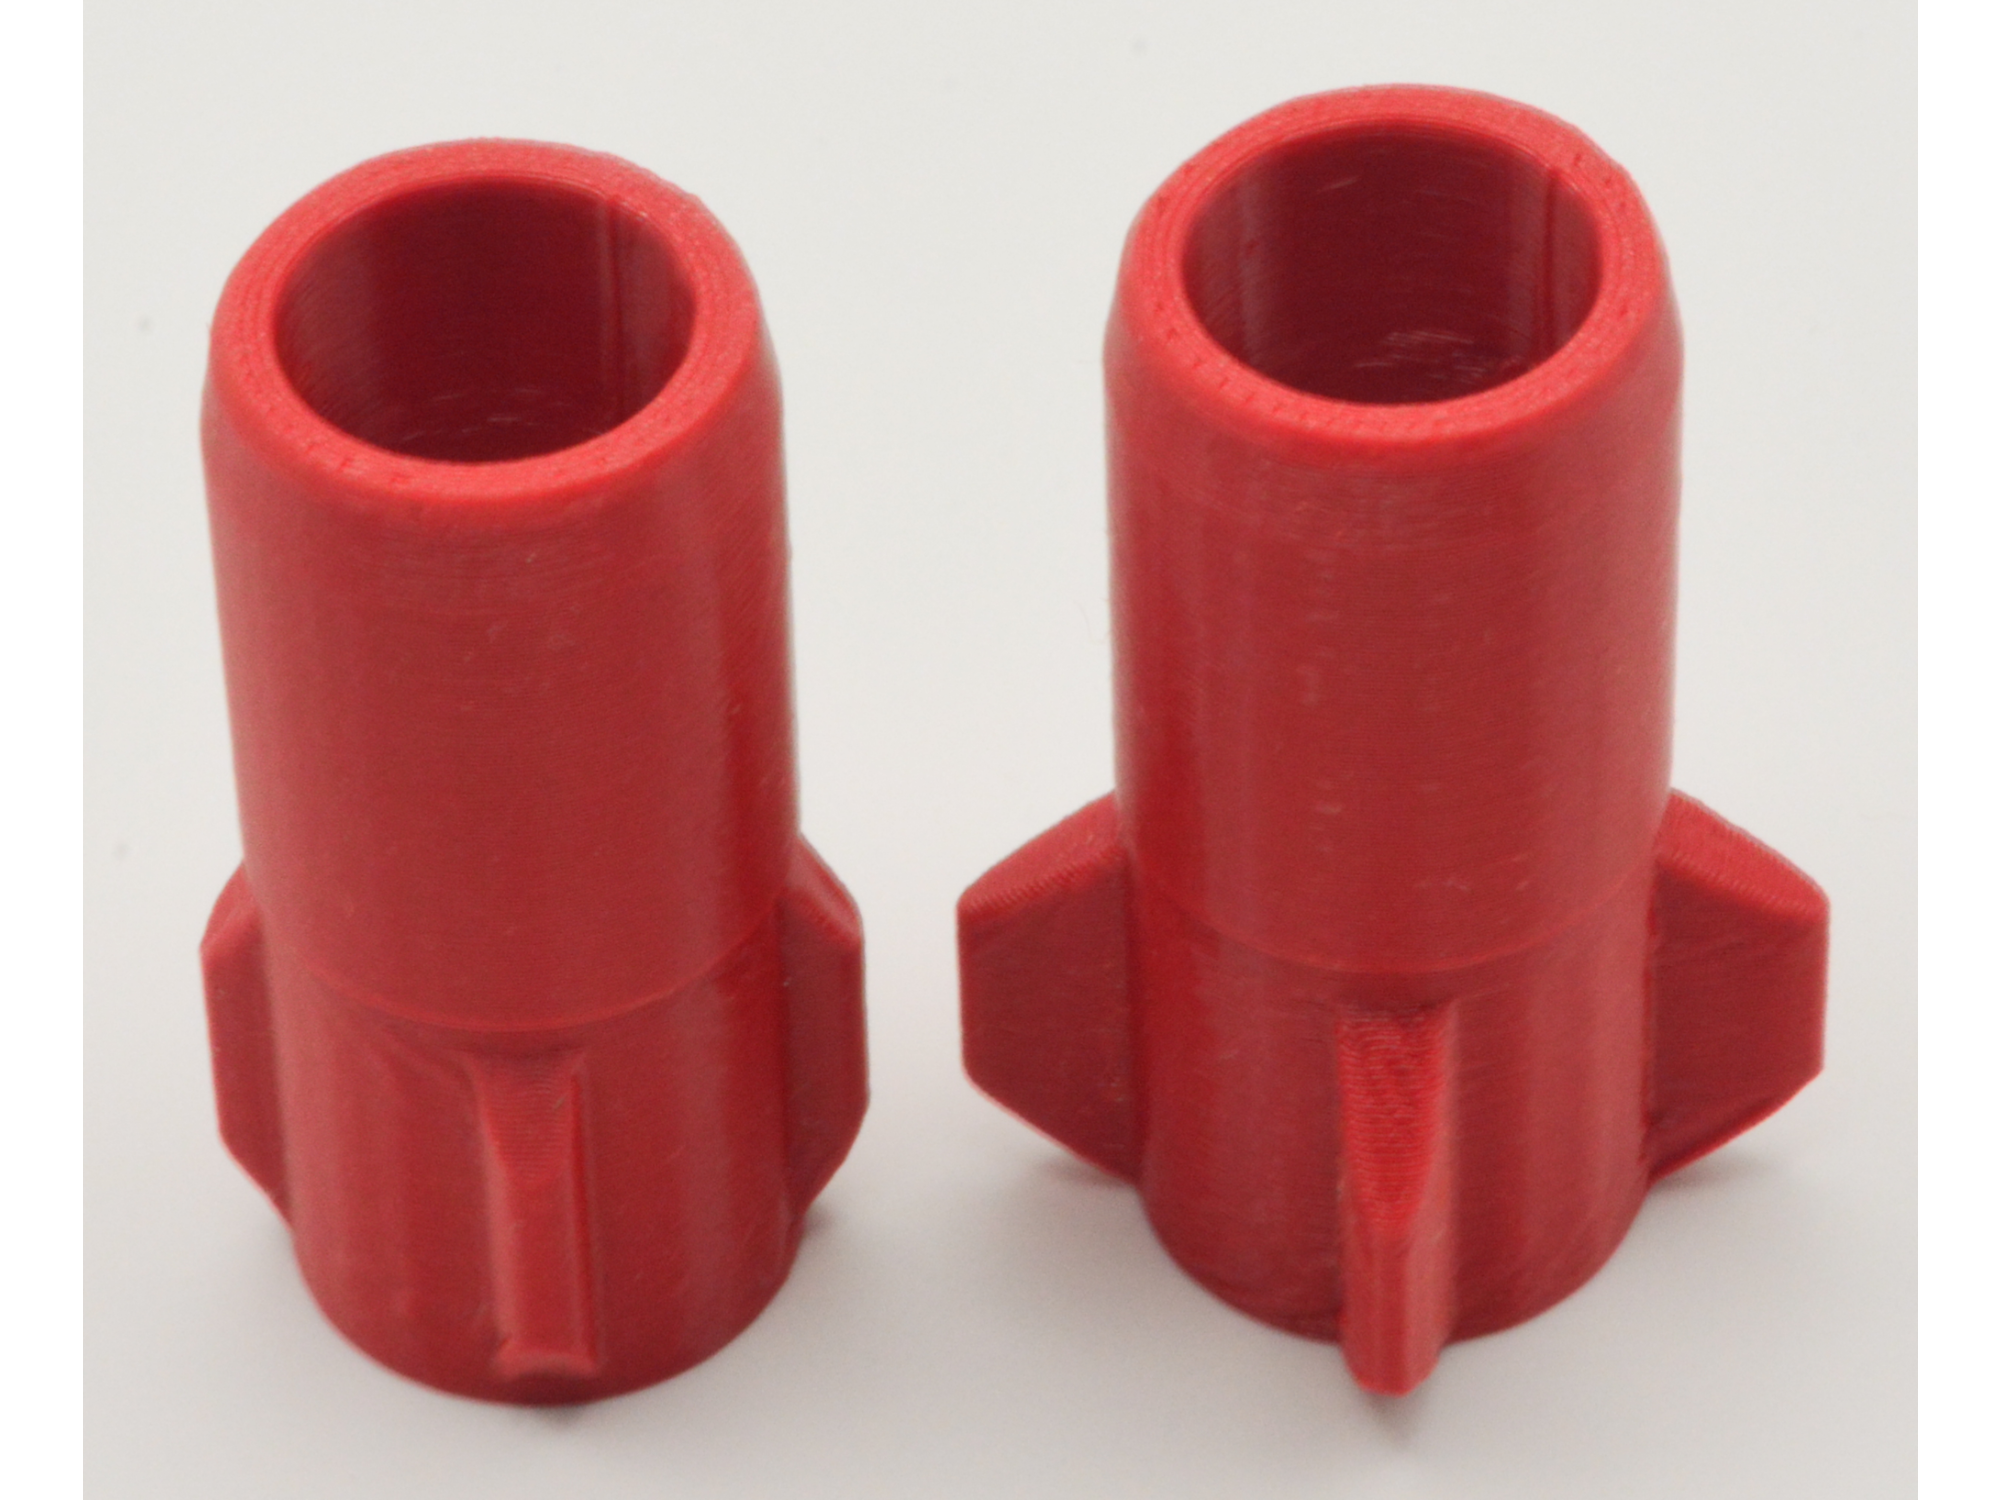 NateChrony 1/2 UNF Threaded Adapters - Red Standard